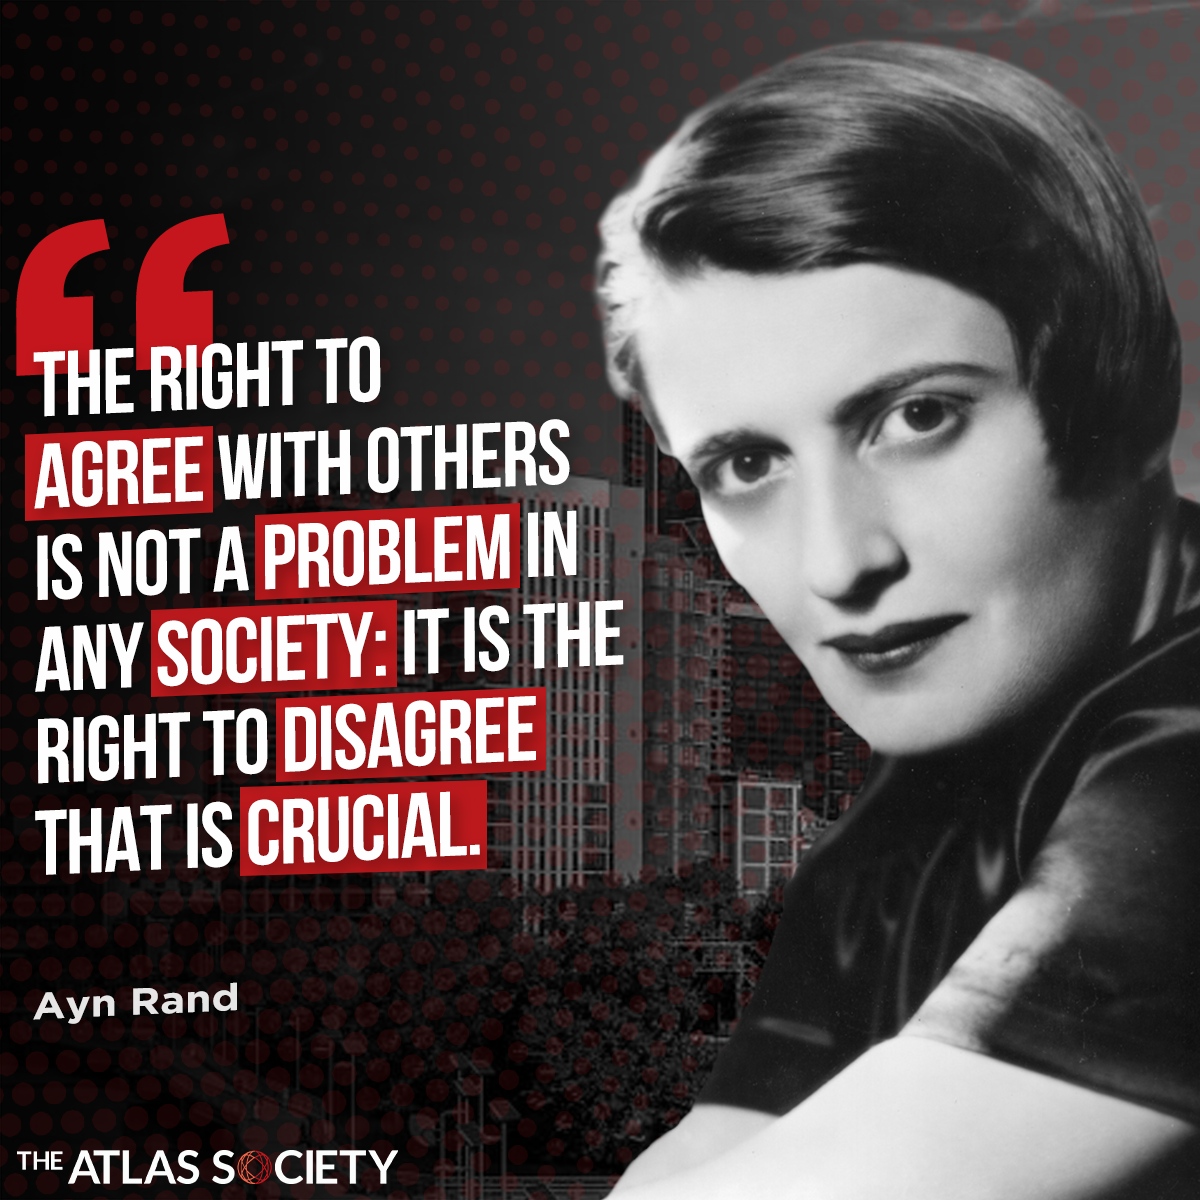 ...Precisely What the Cancel Culture Mob Wants to Destroy! #America #1stAmendment #AynRand